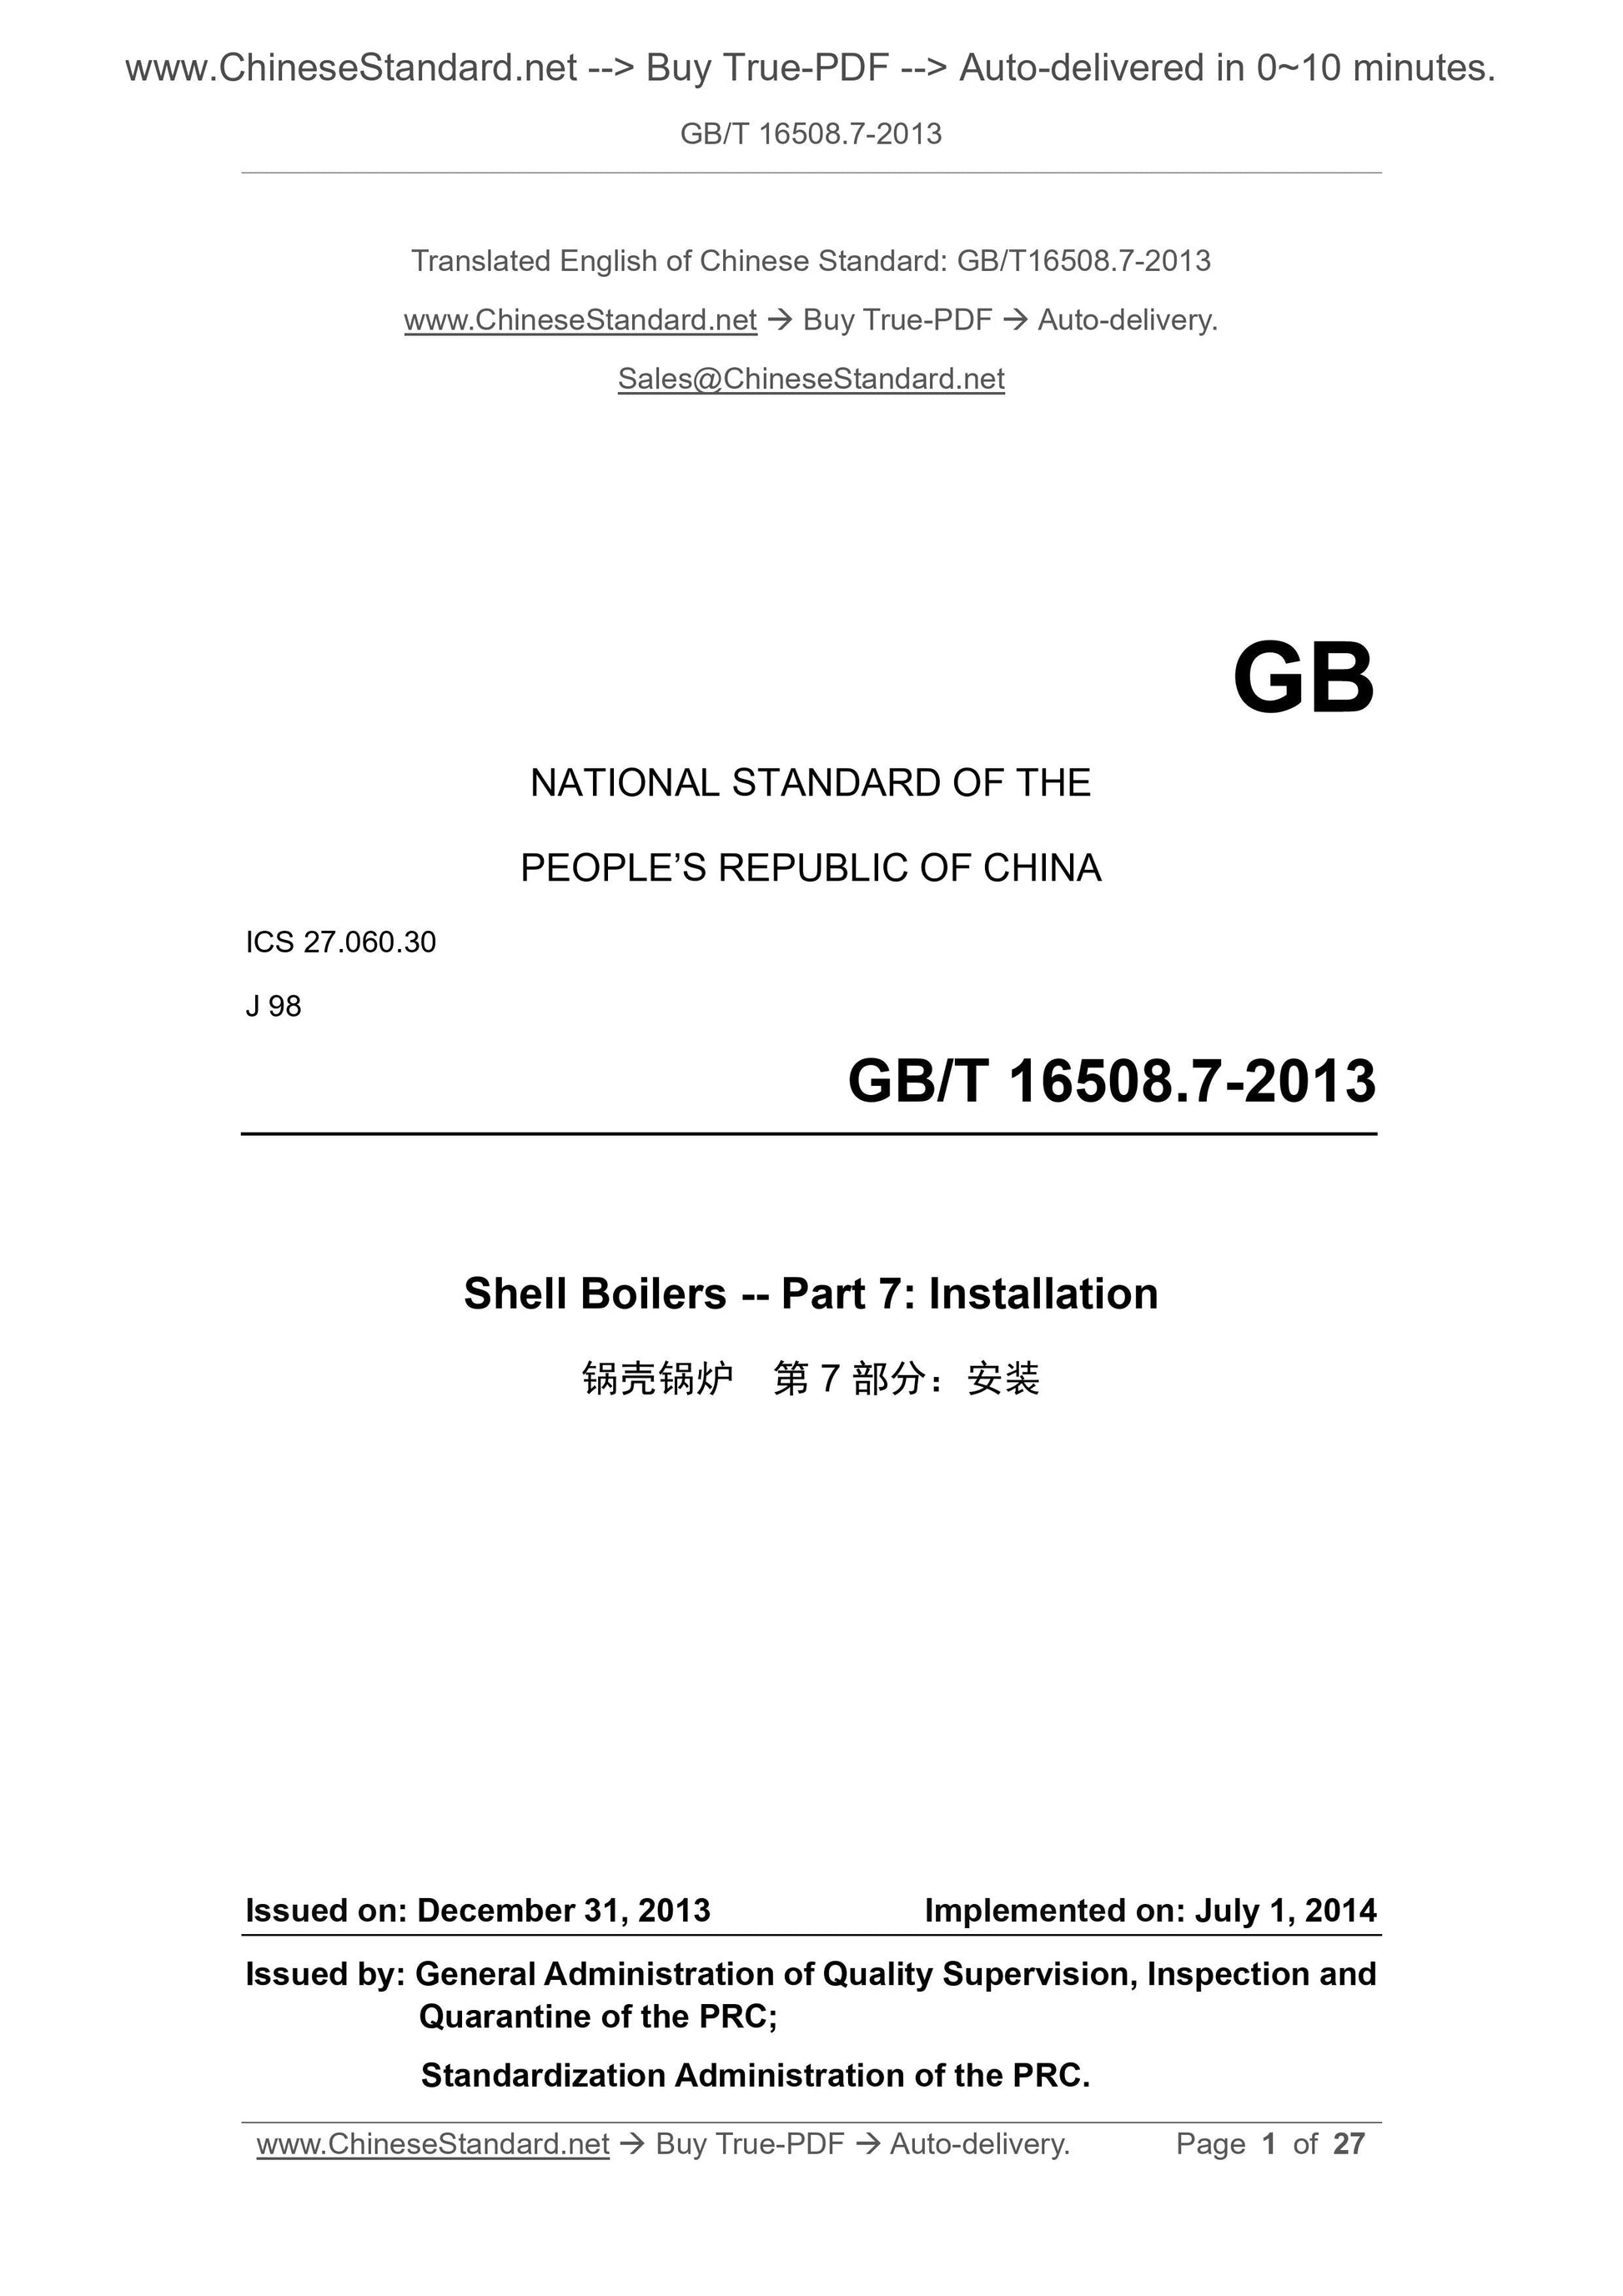 GB/T 16508.7-2013 Page 1